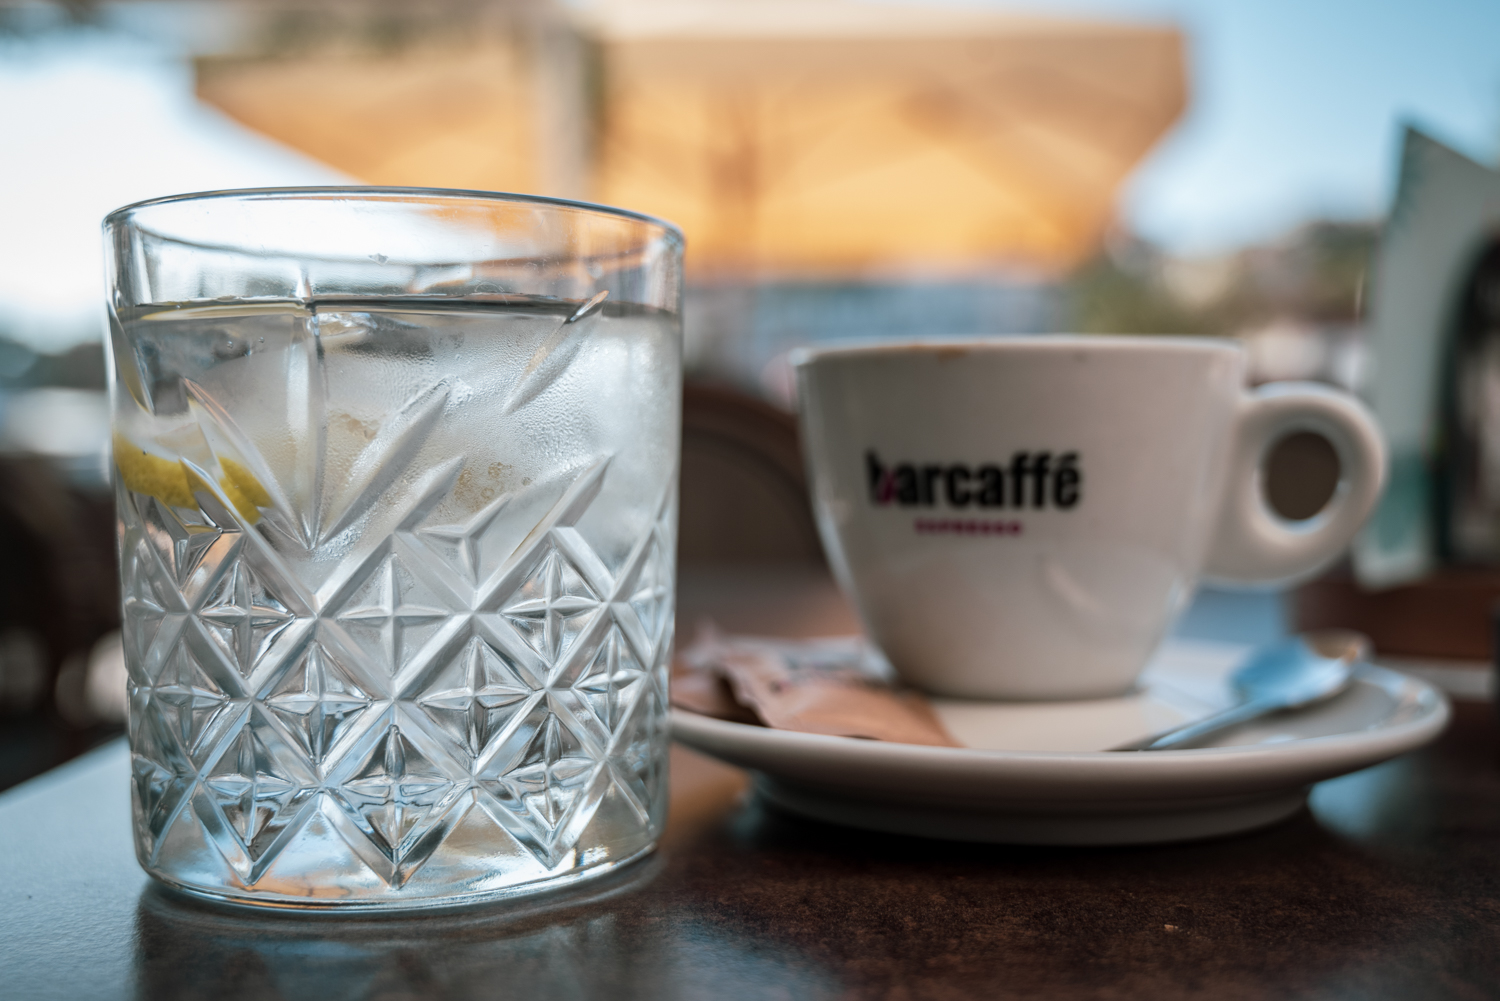 Espresso and water